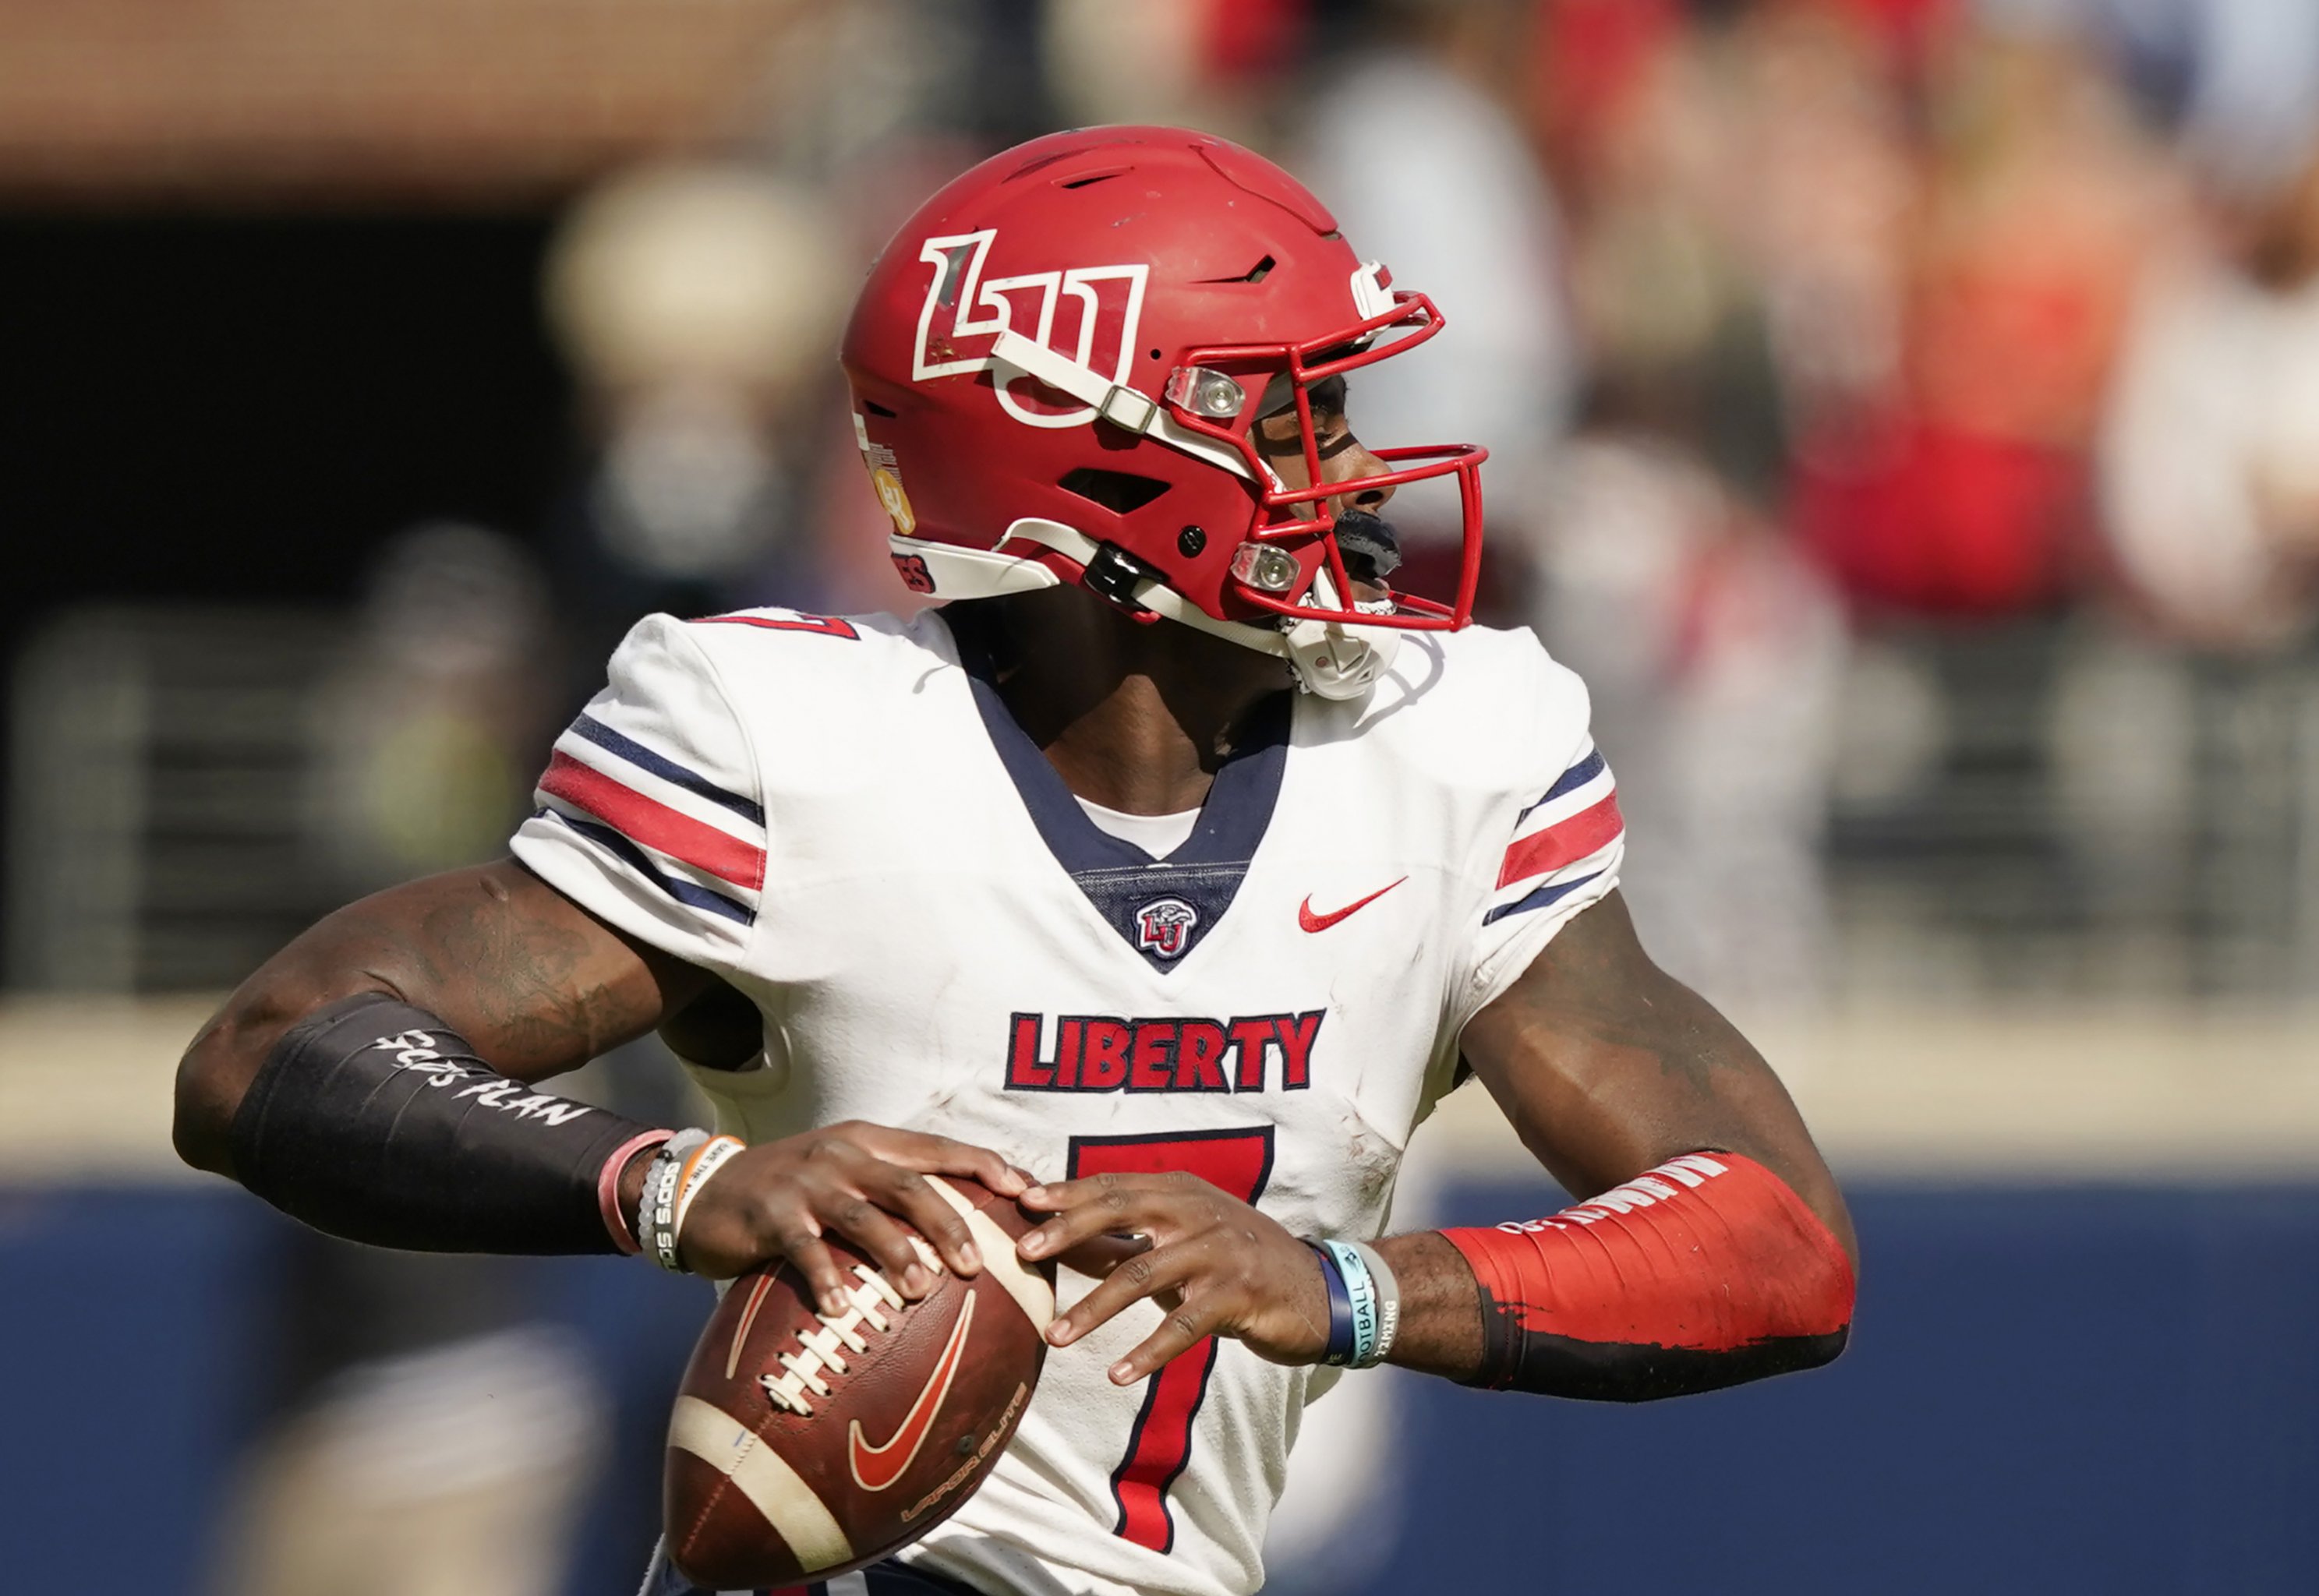 2022 NFL Draft positional rankings: Top quarterbacks for the